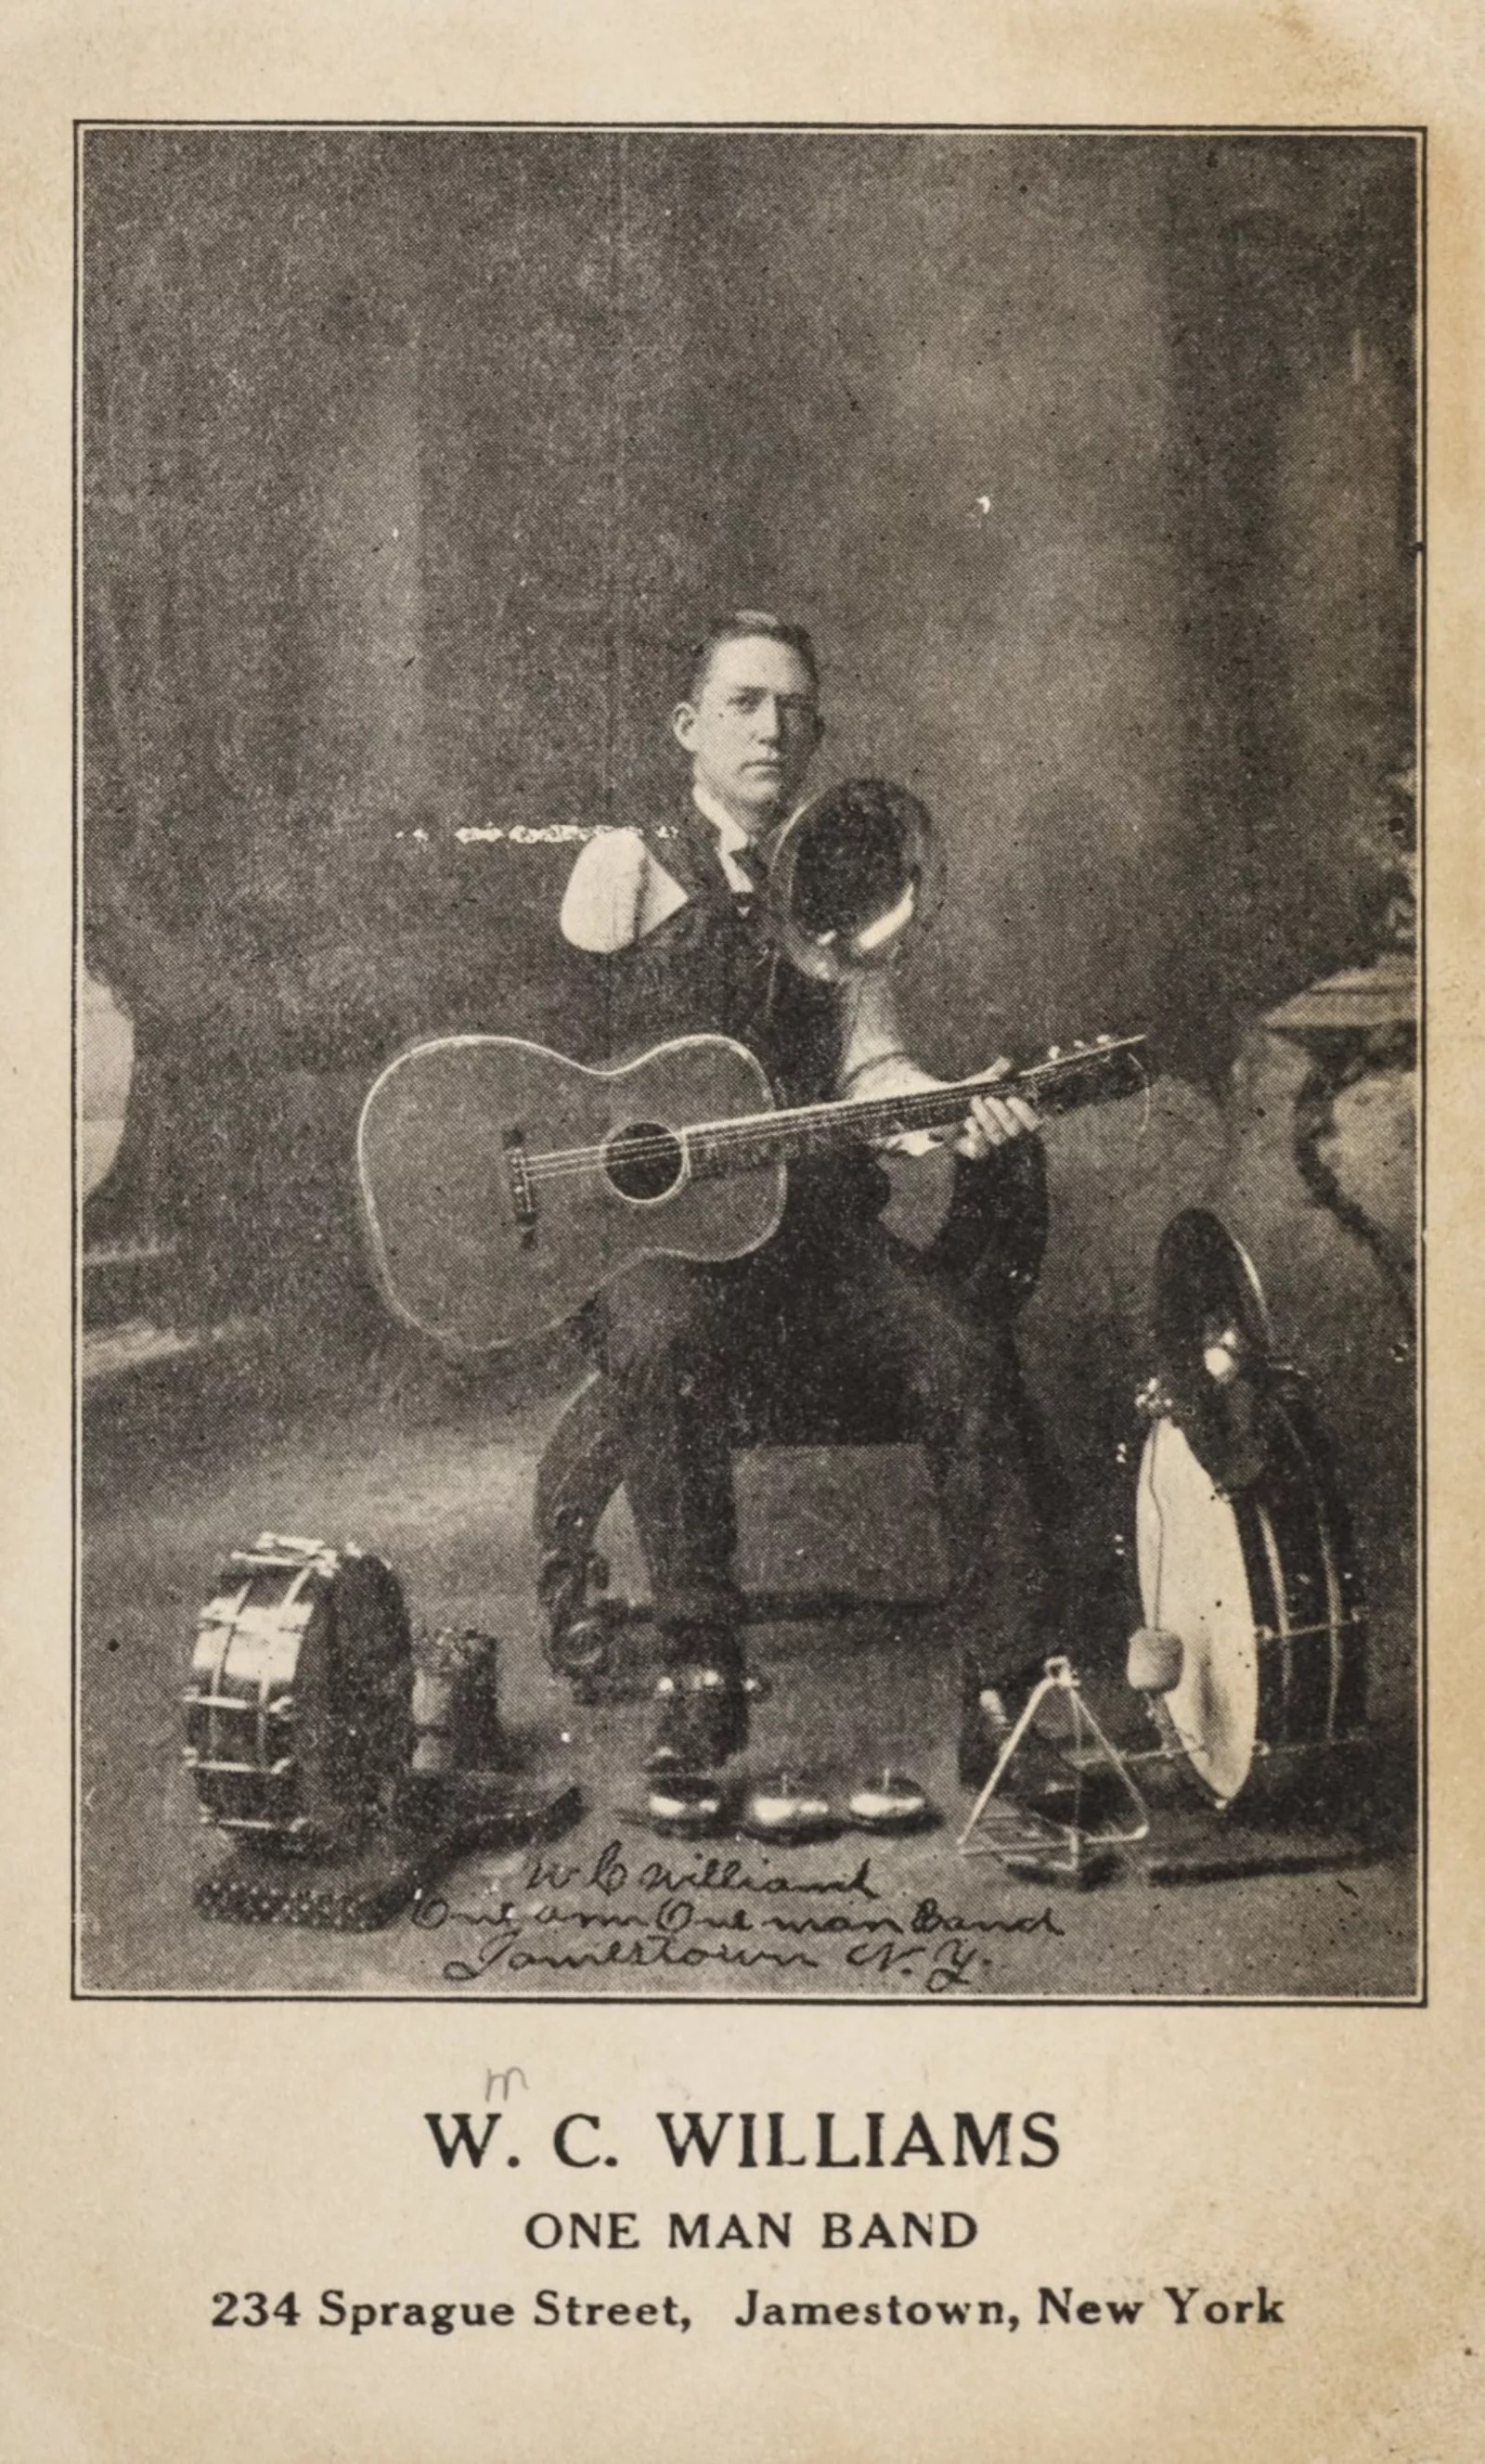 Williams seated with his many instruments, including a guitar, trombone, and multiple drums.